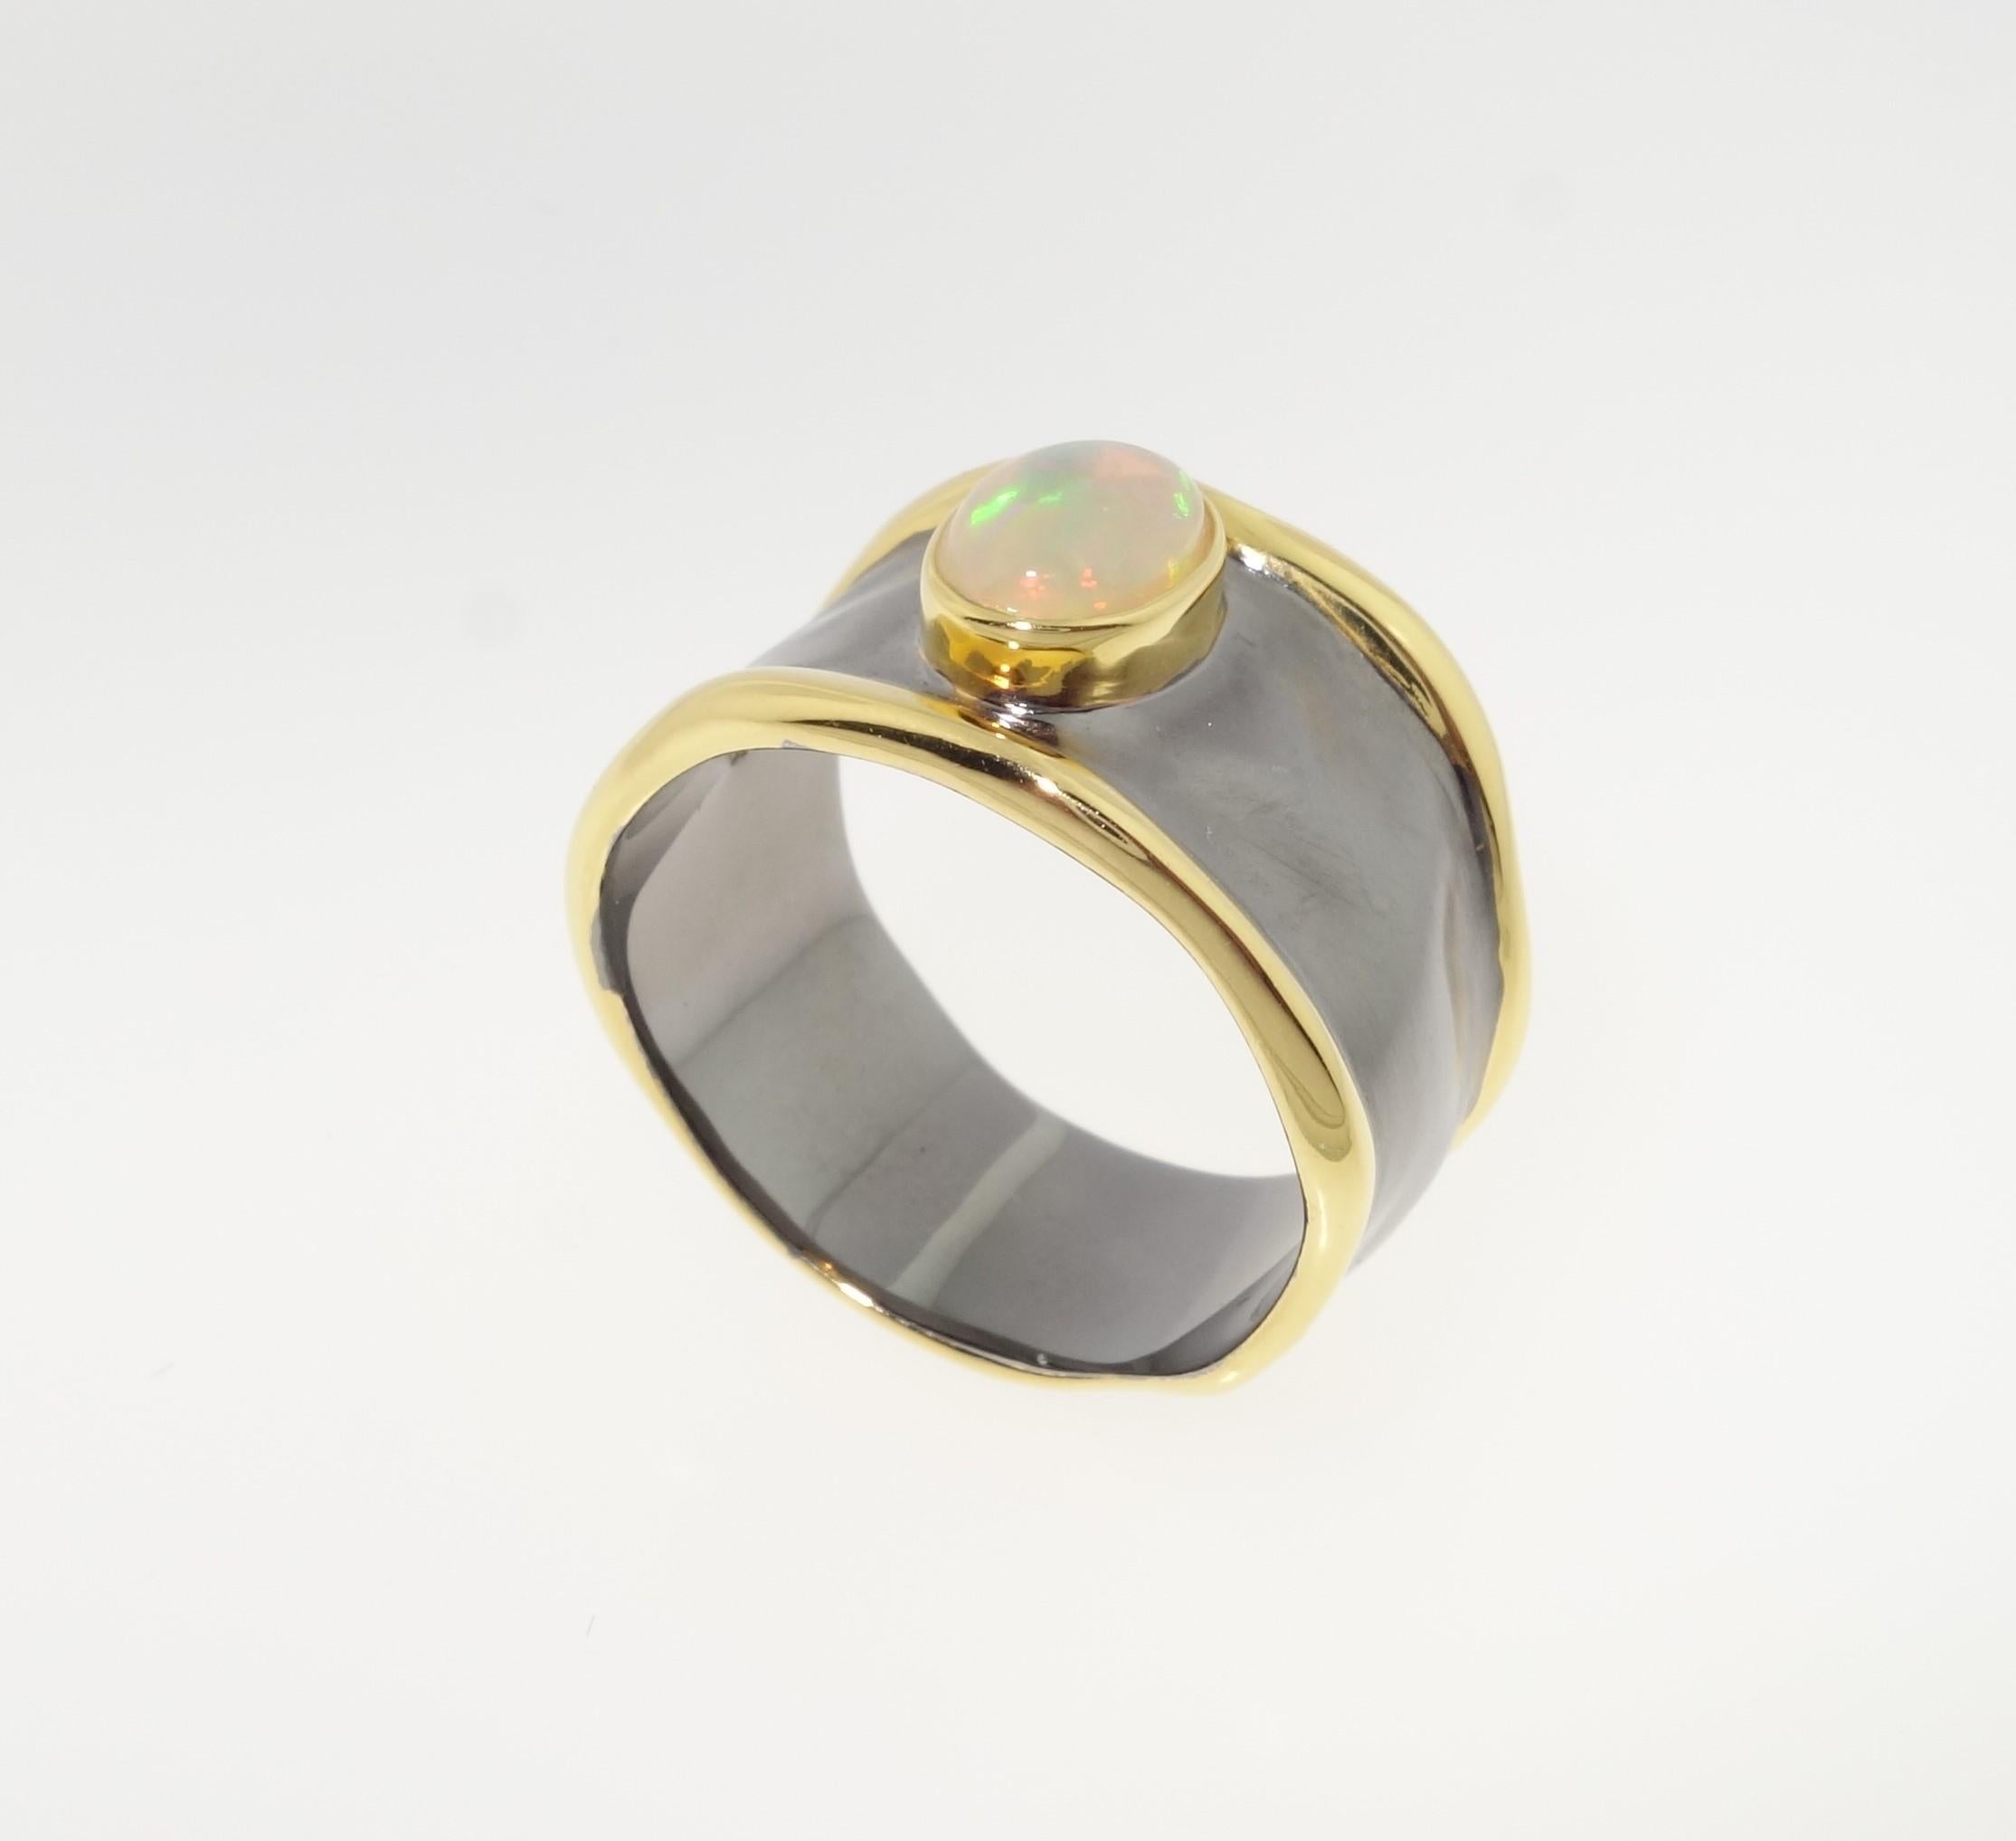 Beautiful Solitaire ring featuring an Ethiopian Opal;  approx.  0.42 carat; Sterling Silver Tarnish-resistant Rhodium and gold accents on either side of mounting; Size 7. Stylish, Classic and Classy…illuminating your look with Timeless Beauty!